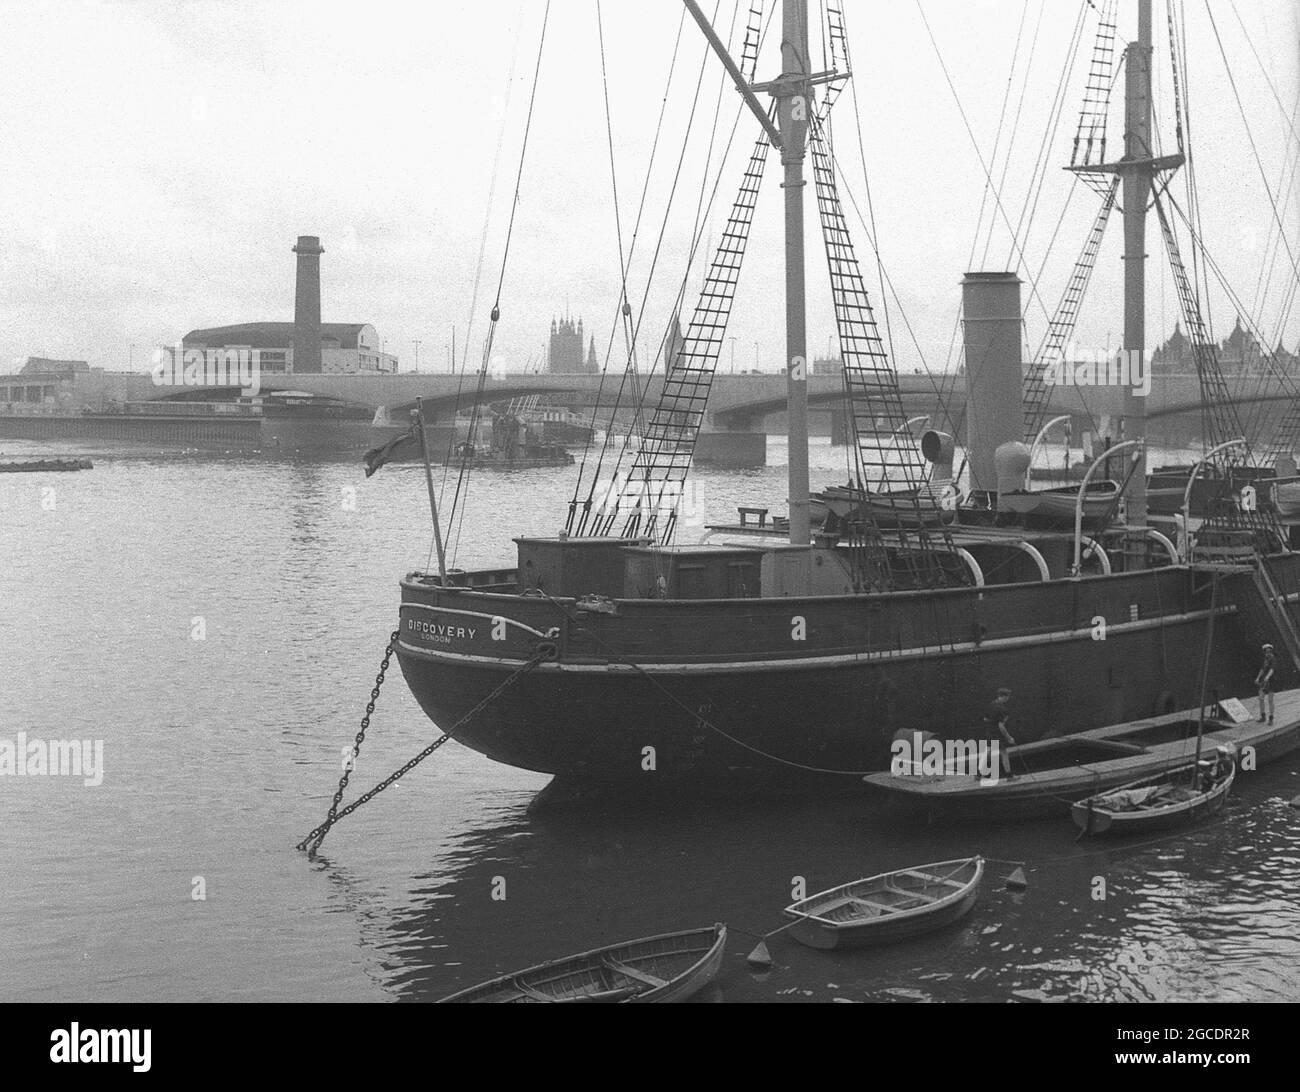 1950s, historical view of the famous barque-rigged sailing ship, 'RRS Discovery' on the river Thames, London, England, UK, the last wooden three-masted ship to be built in Britain. A sailing vessel wth auxillary steam propulsion, she was constructed in Dundee, Scotland. Built specially for Antartic research, her first journey, known as the Discovery Expedition (1901-1904) carried British explorers Robert Falcon Scott and Ernest Shackletone to the region. After being in the Australian Antartic from 1929 to 1931, she was then moored on the Thames as a static training ship and visitor attraction. Stock Photo